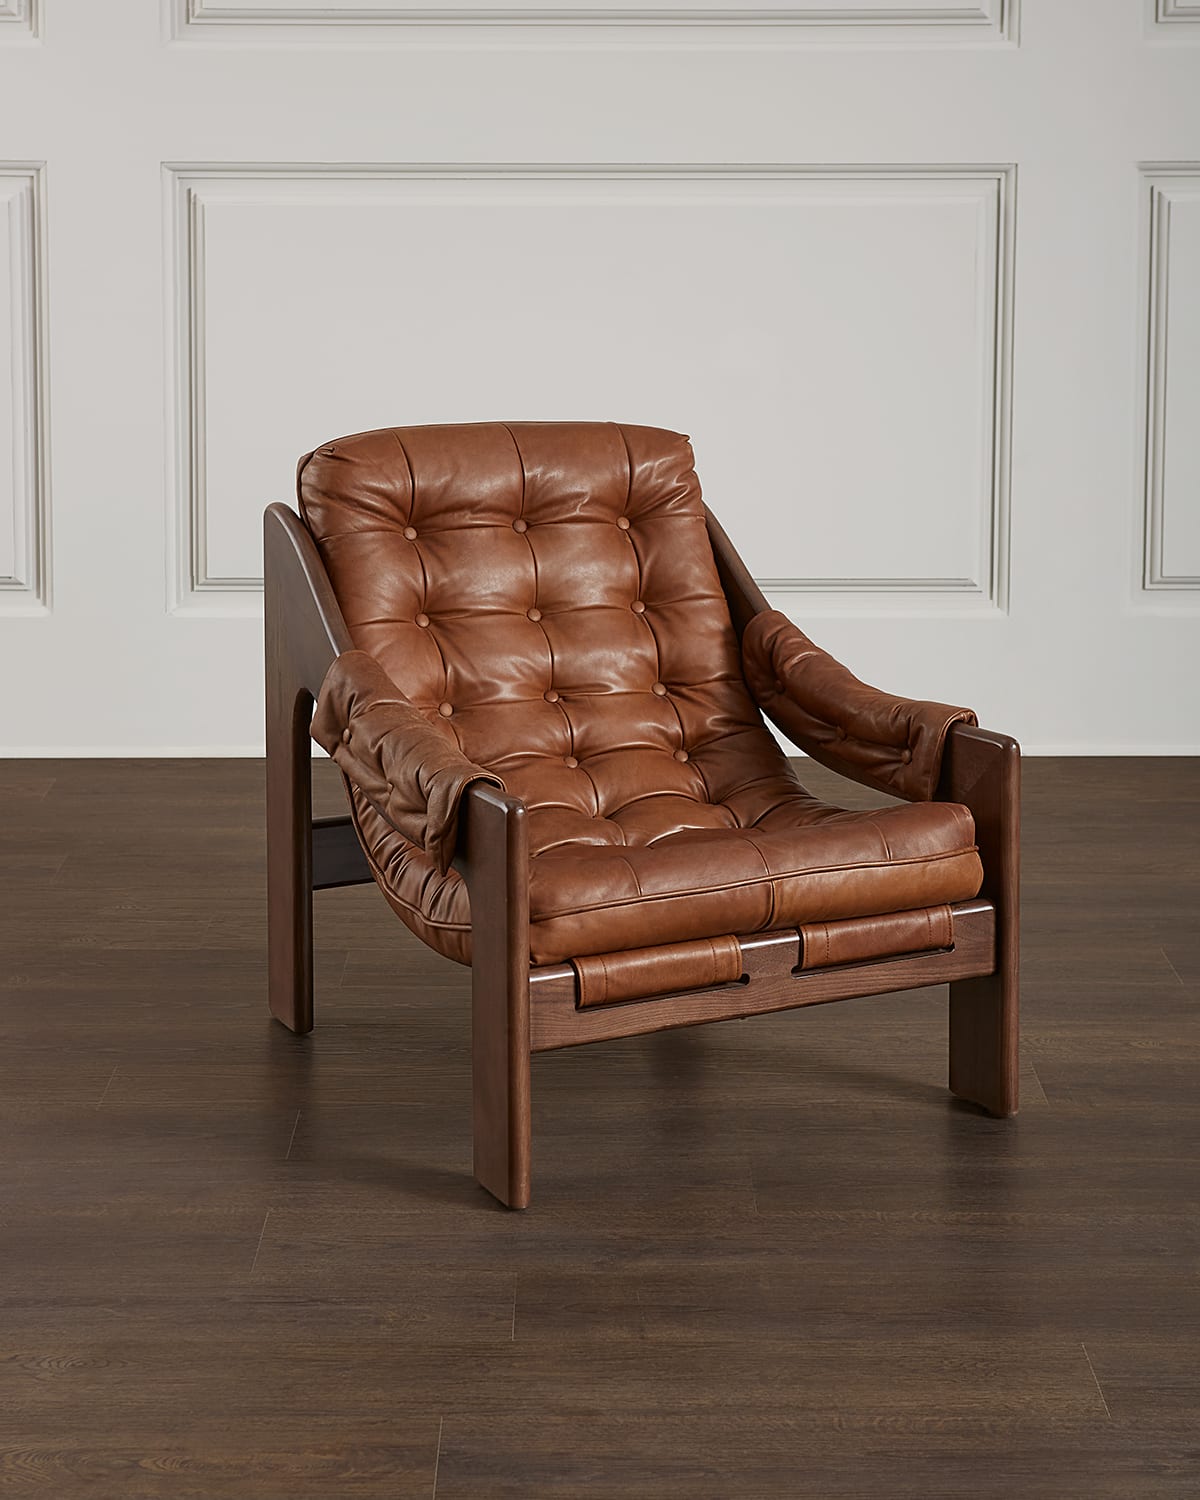 Halston Leather Sling Chair